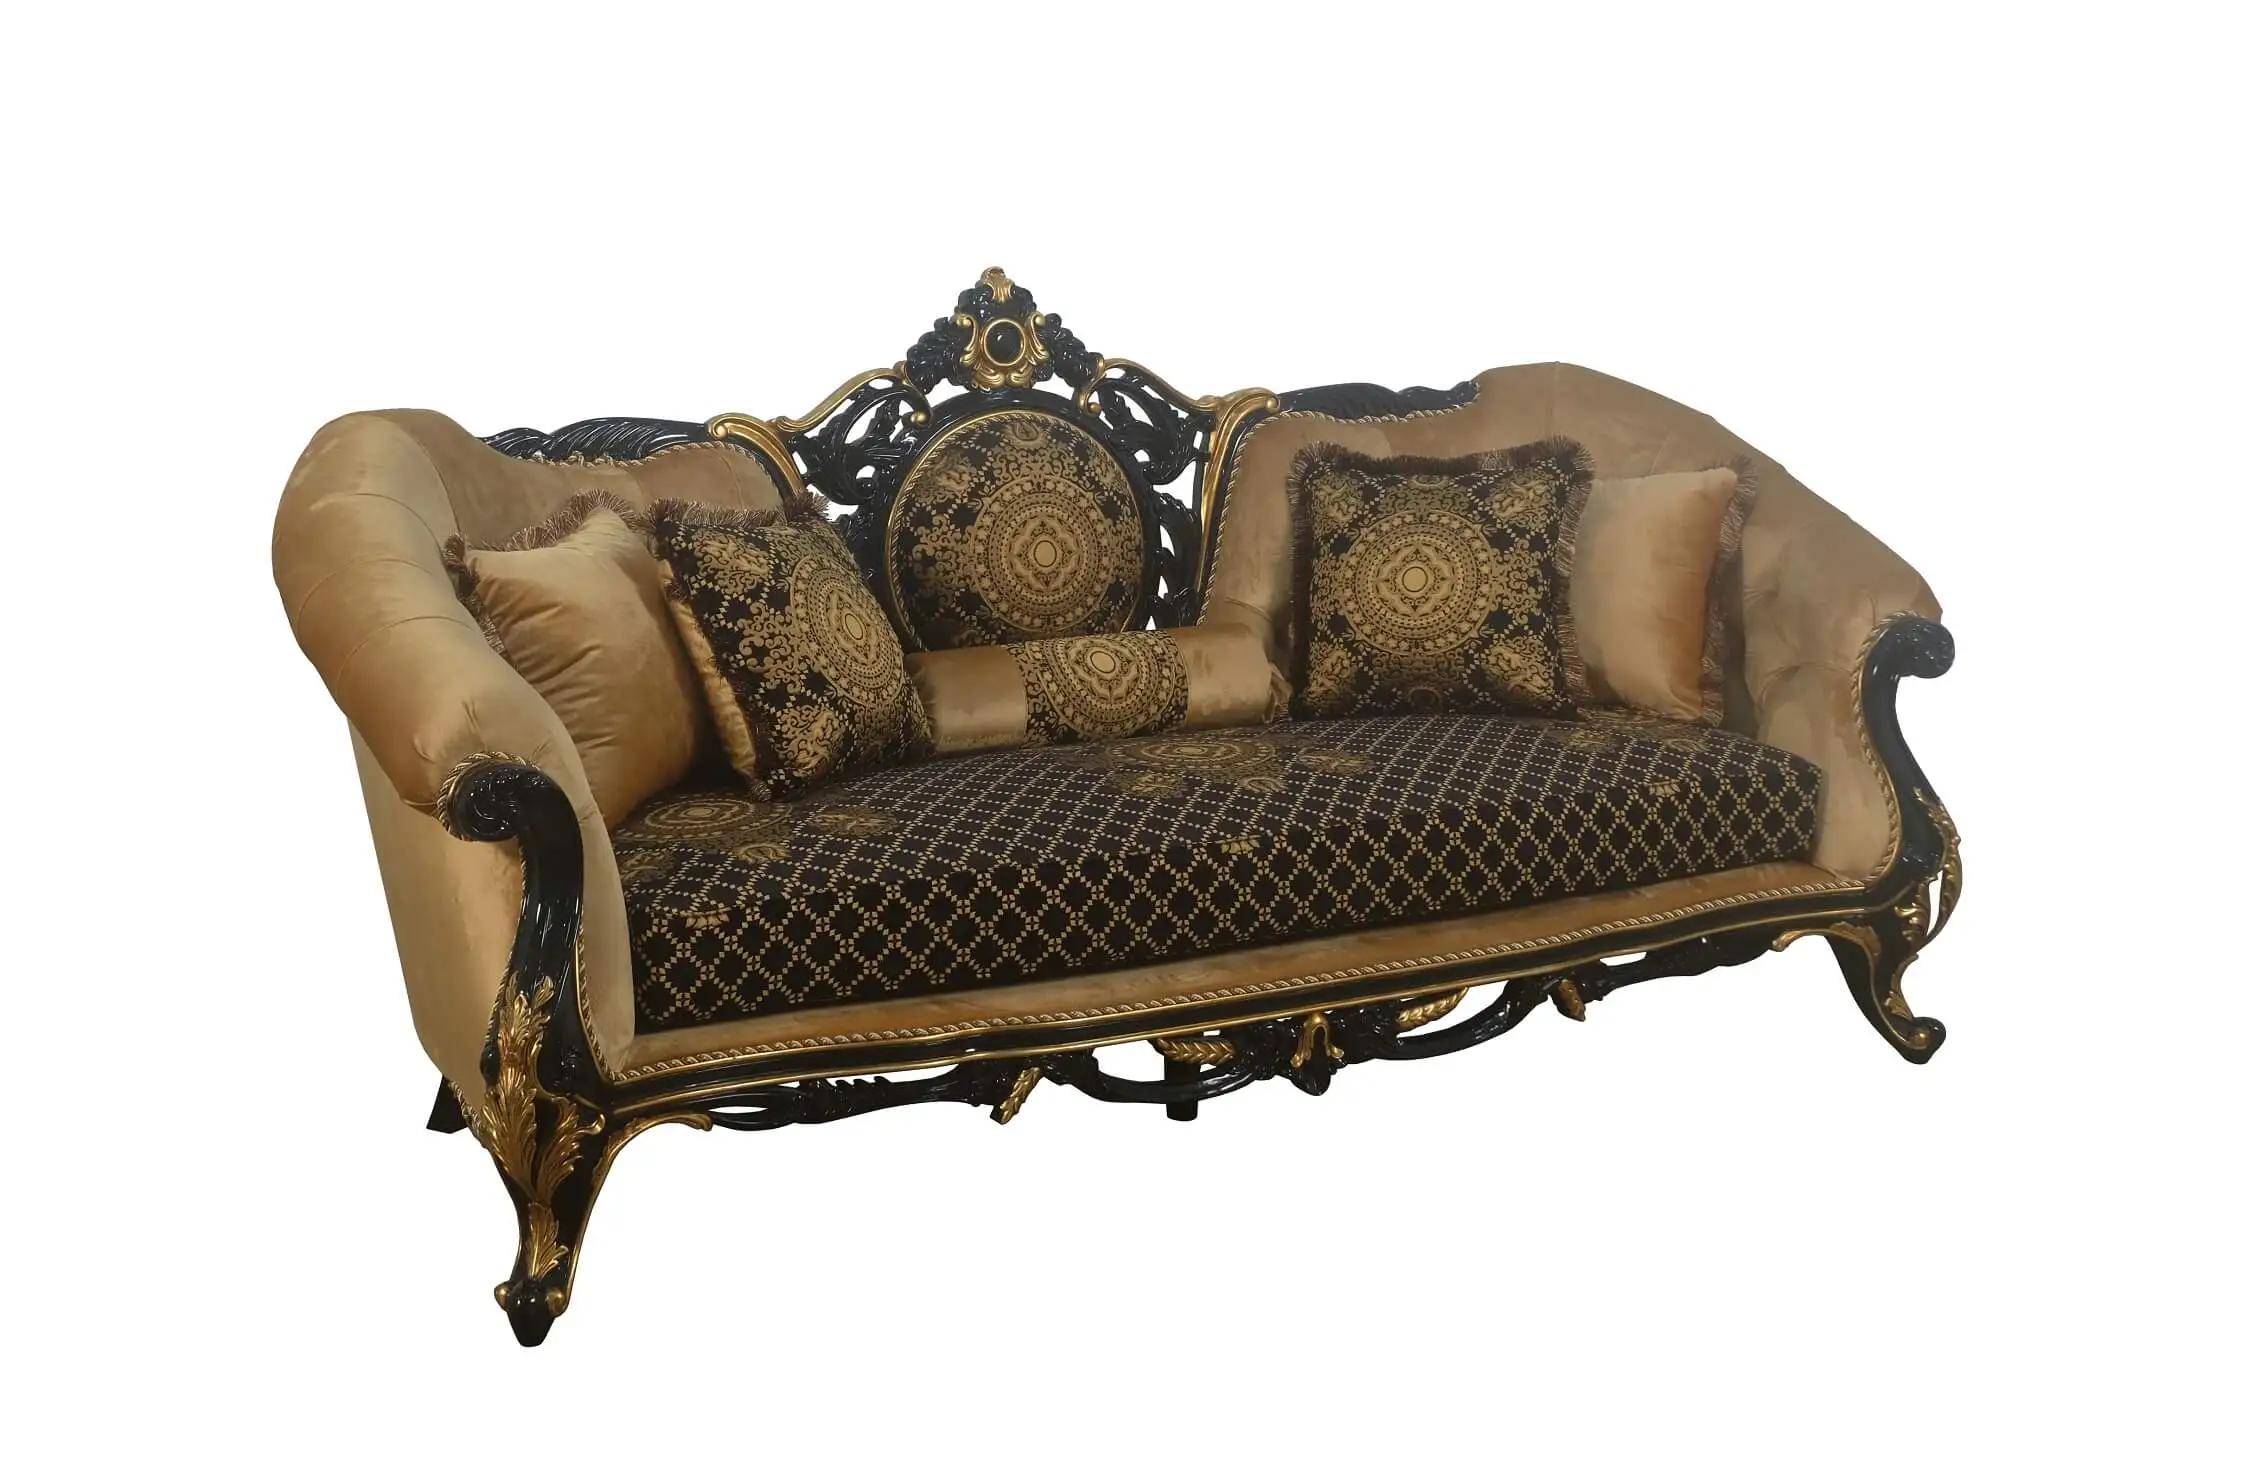 Classic, Traditional Sofa ROSELLA 44696-S in Gold, Black Fabric